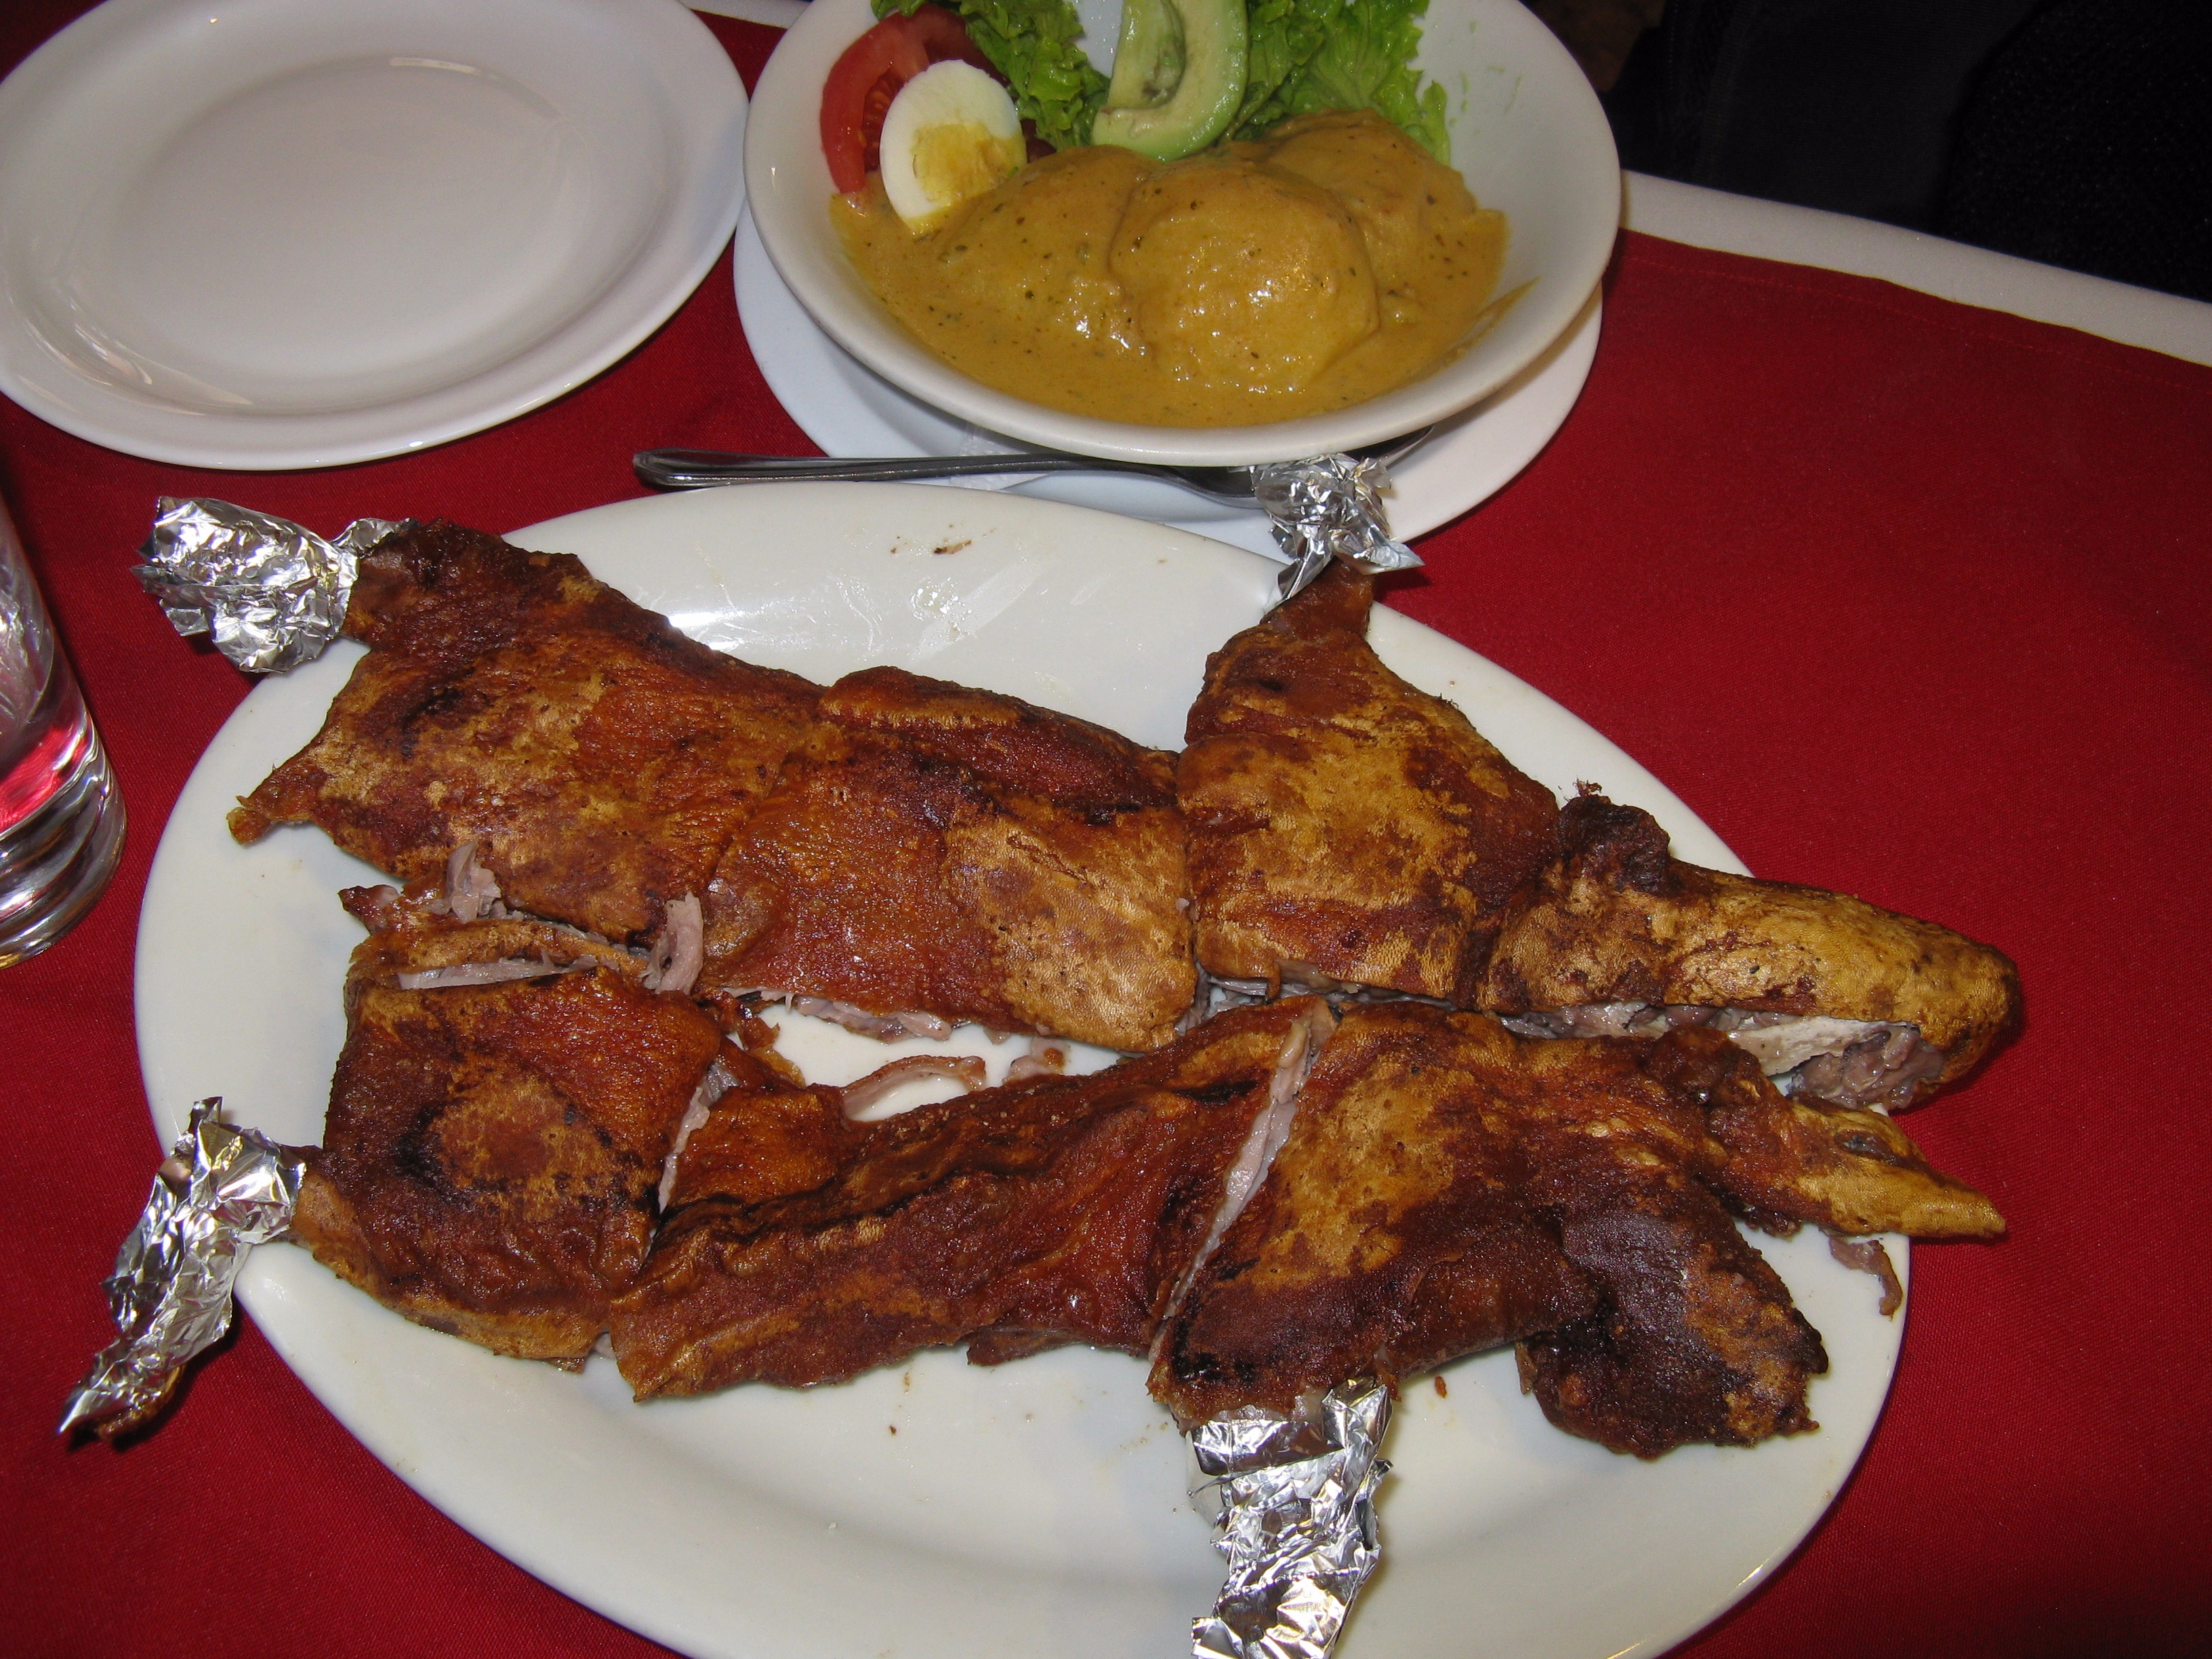 The team tried a local delicacy, cuy (guinea pig).